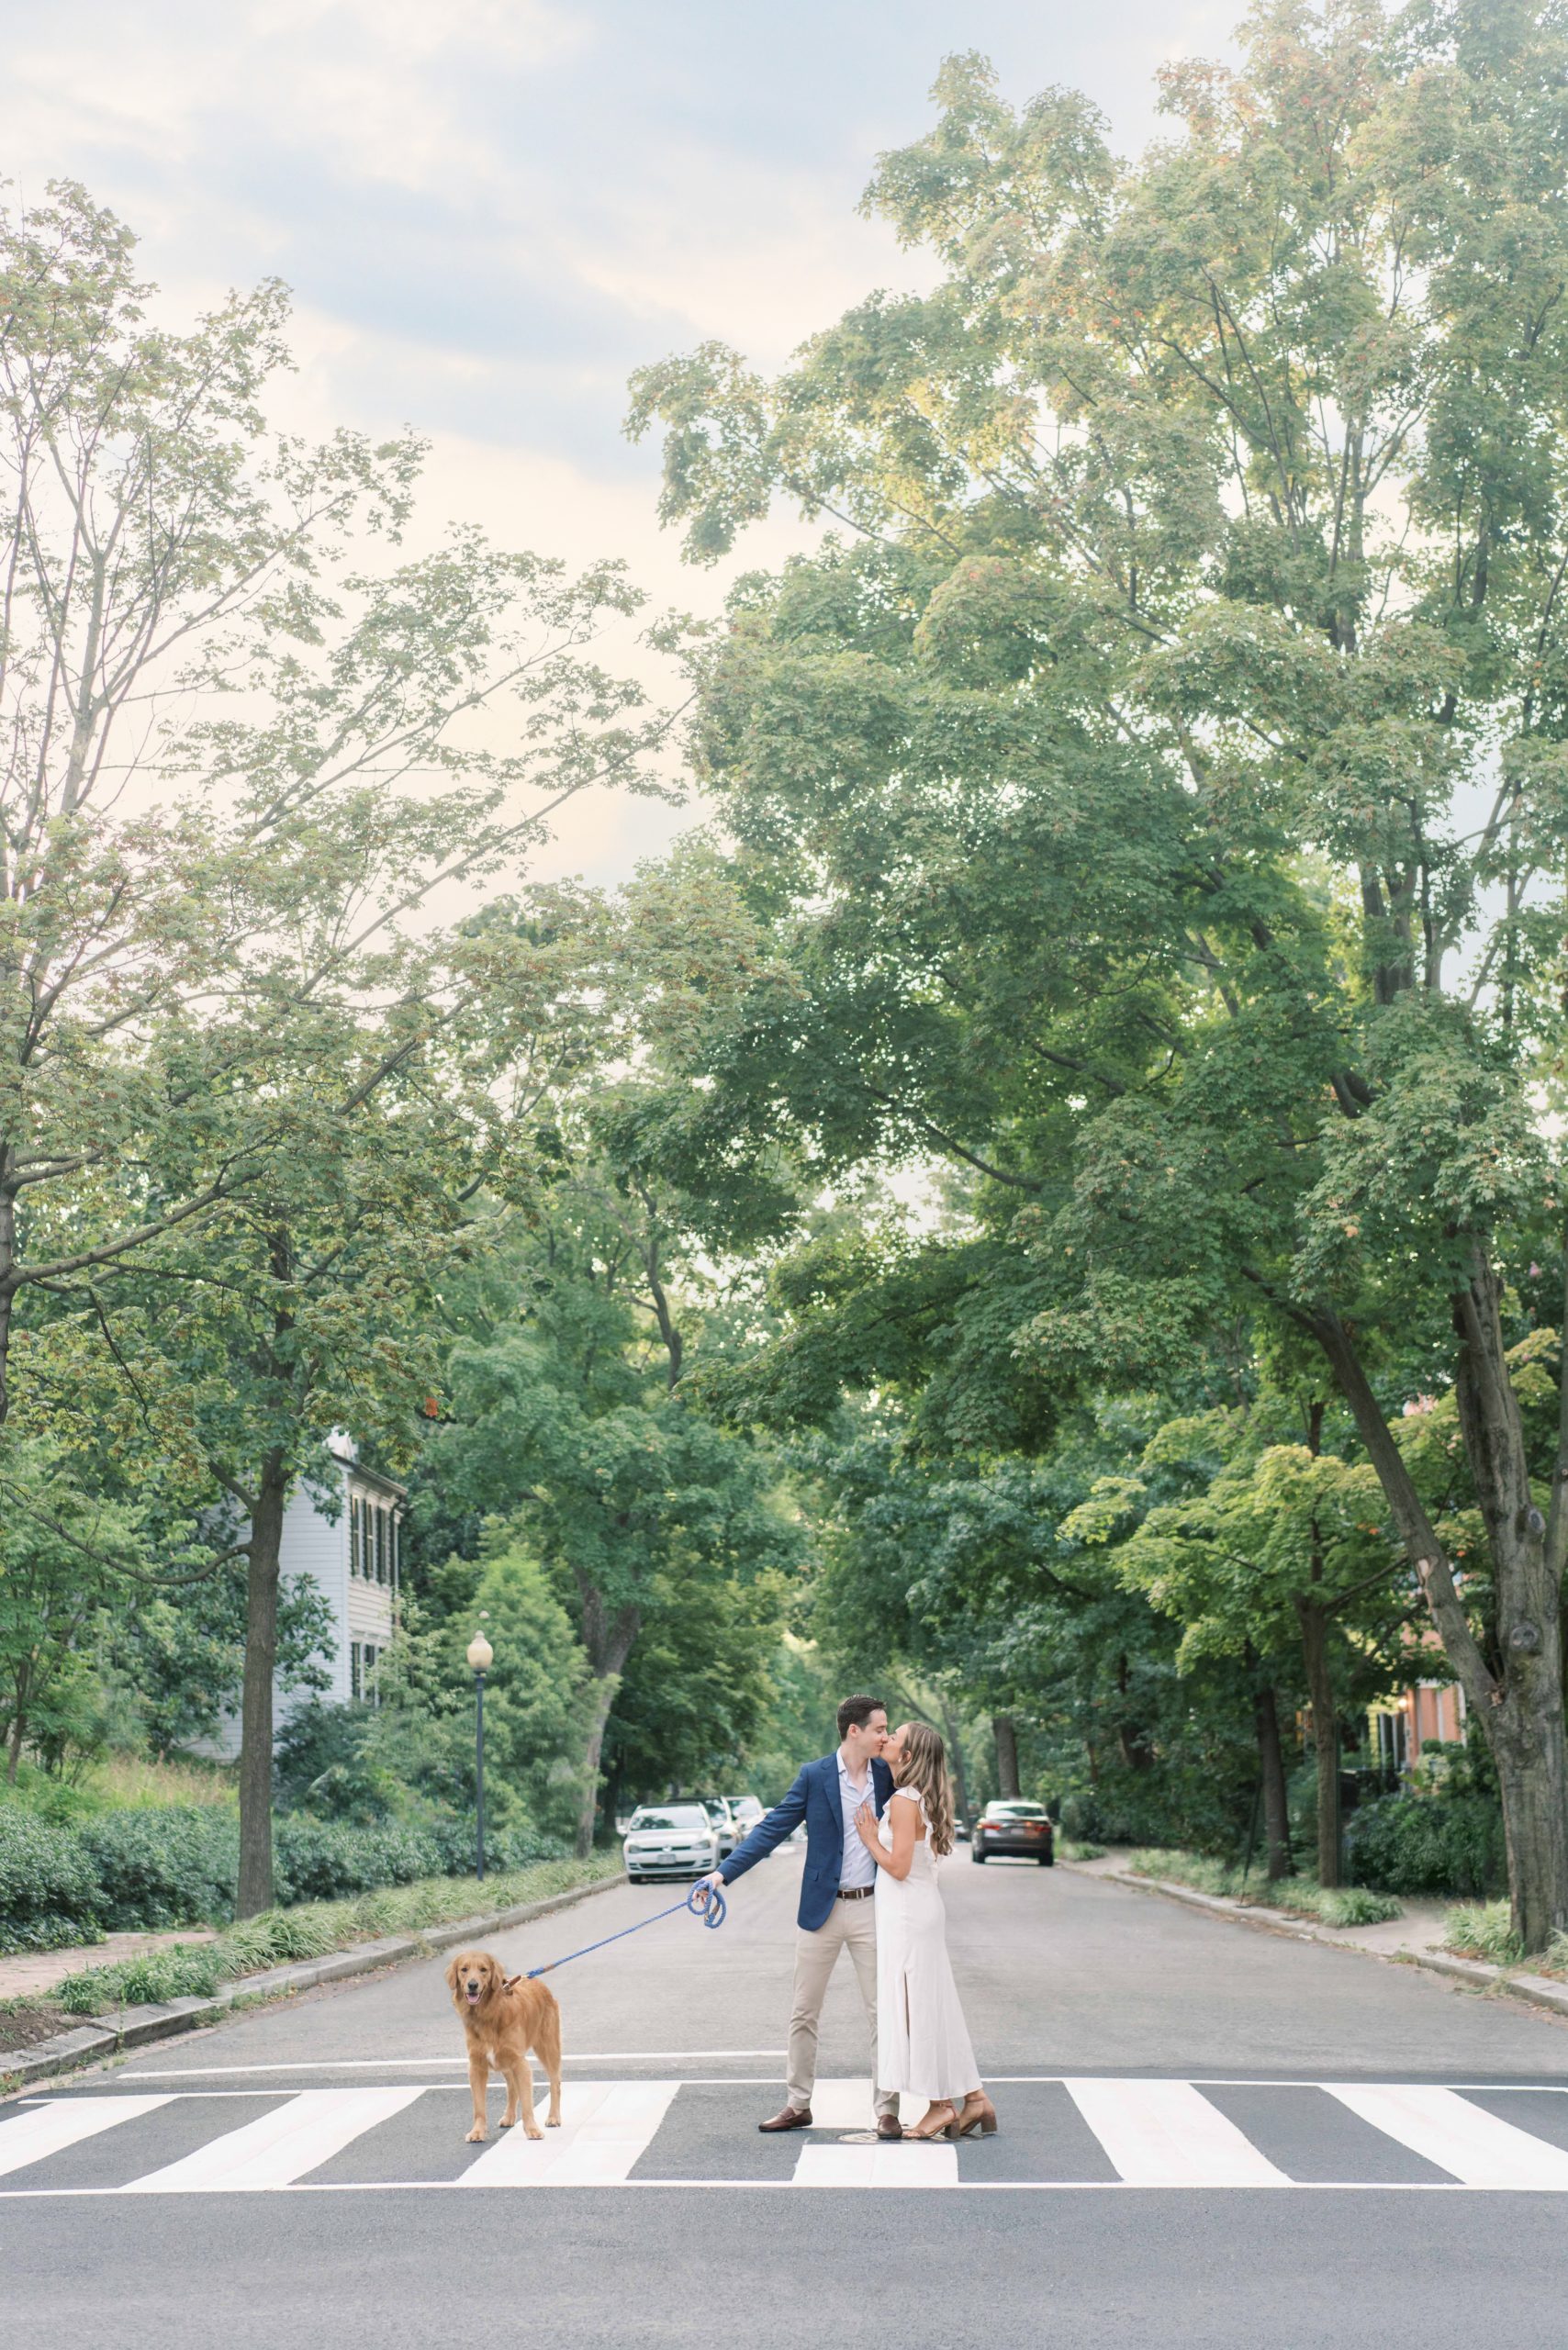 A sunrise engagement session in Washington, DC on the Georgetown Visitation Campus and the surrounding neighborhoods.